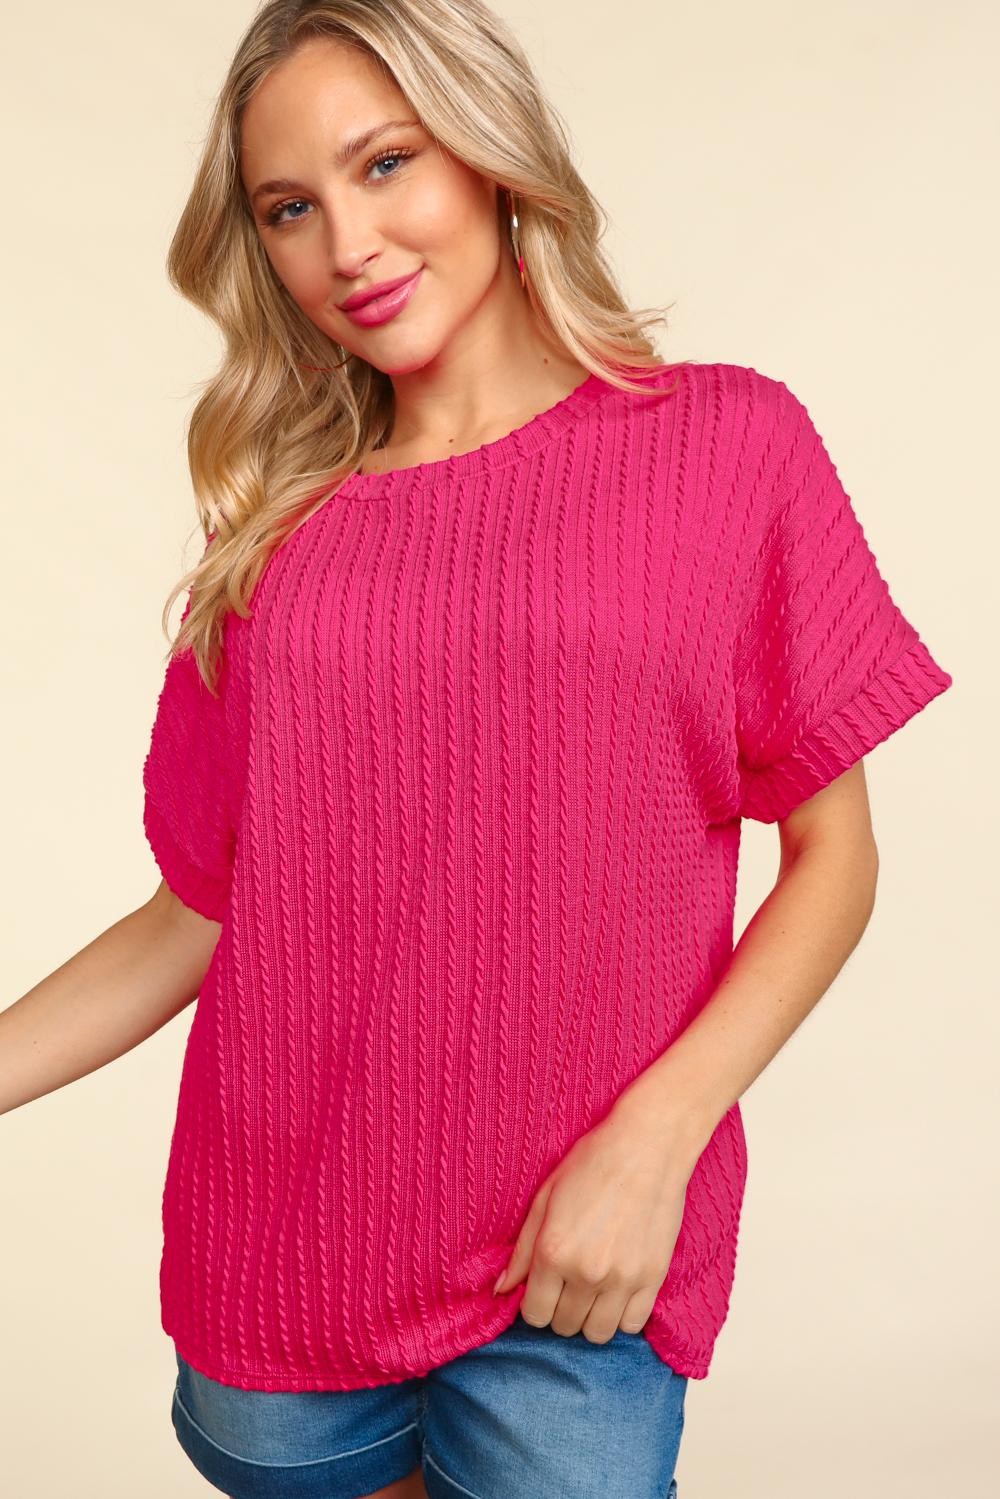 DOLAN CABLE SWEATER SHAPE SOLID KNIT TOP S-3X